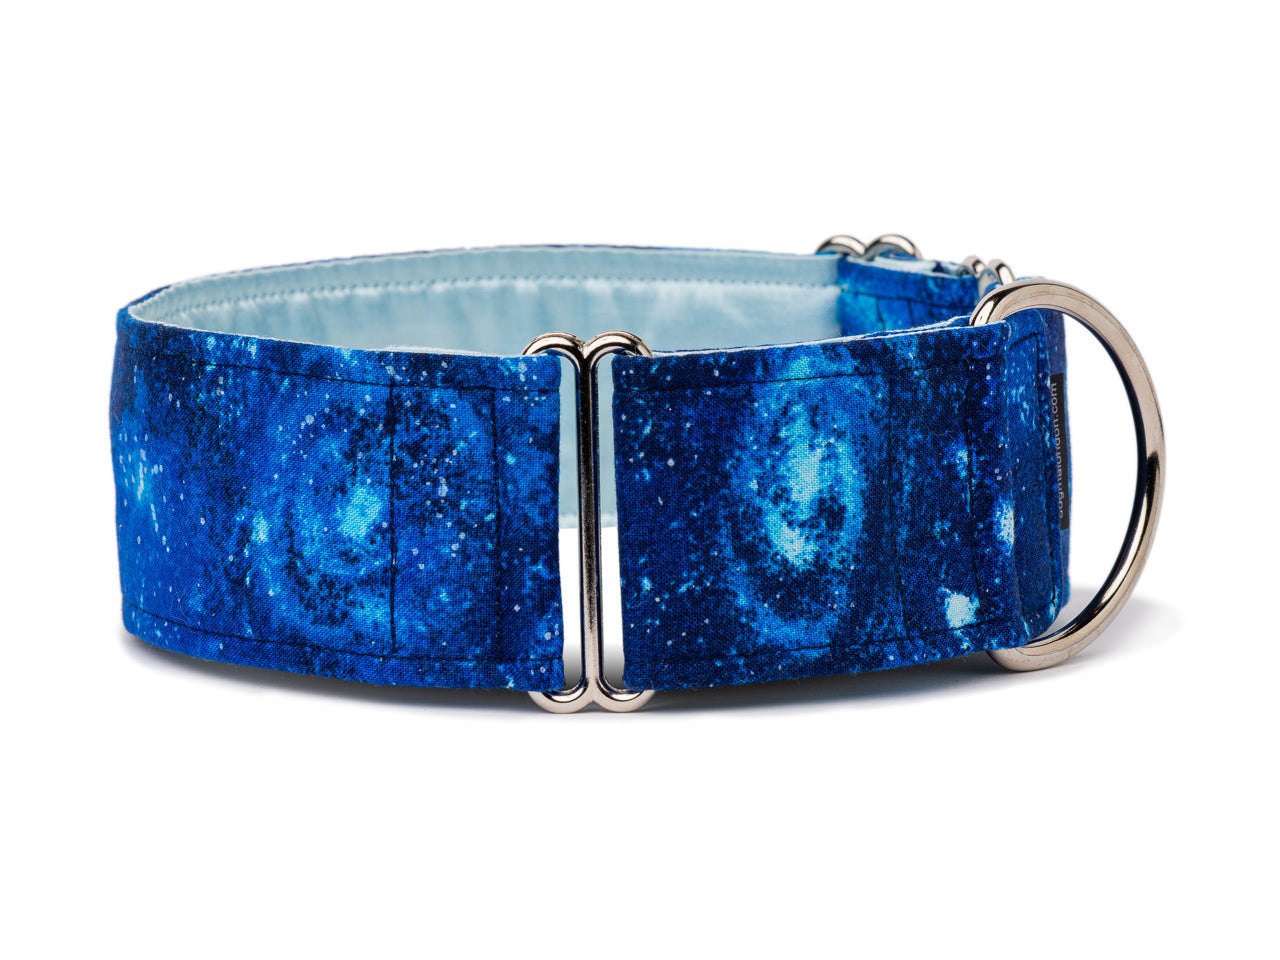 Have the best dog in the whole universe? Then this is the collar for your pooch! Stars and galaxies on deep blue highlight your dog's place in the center of it all!